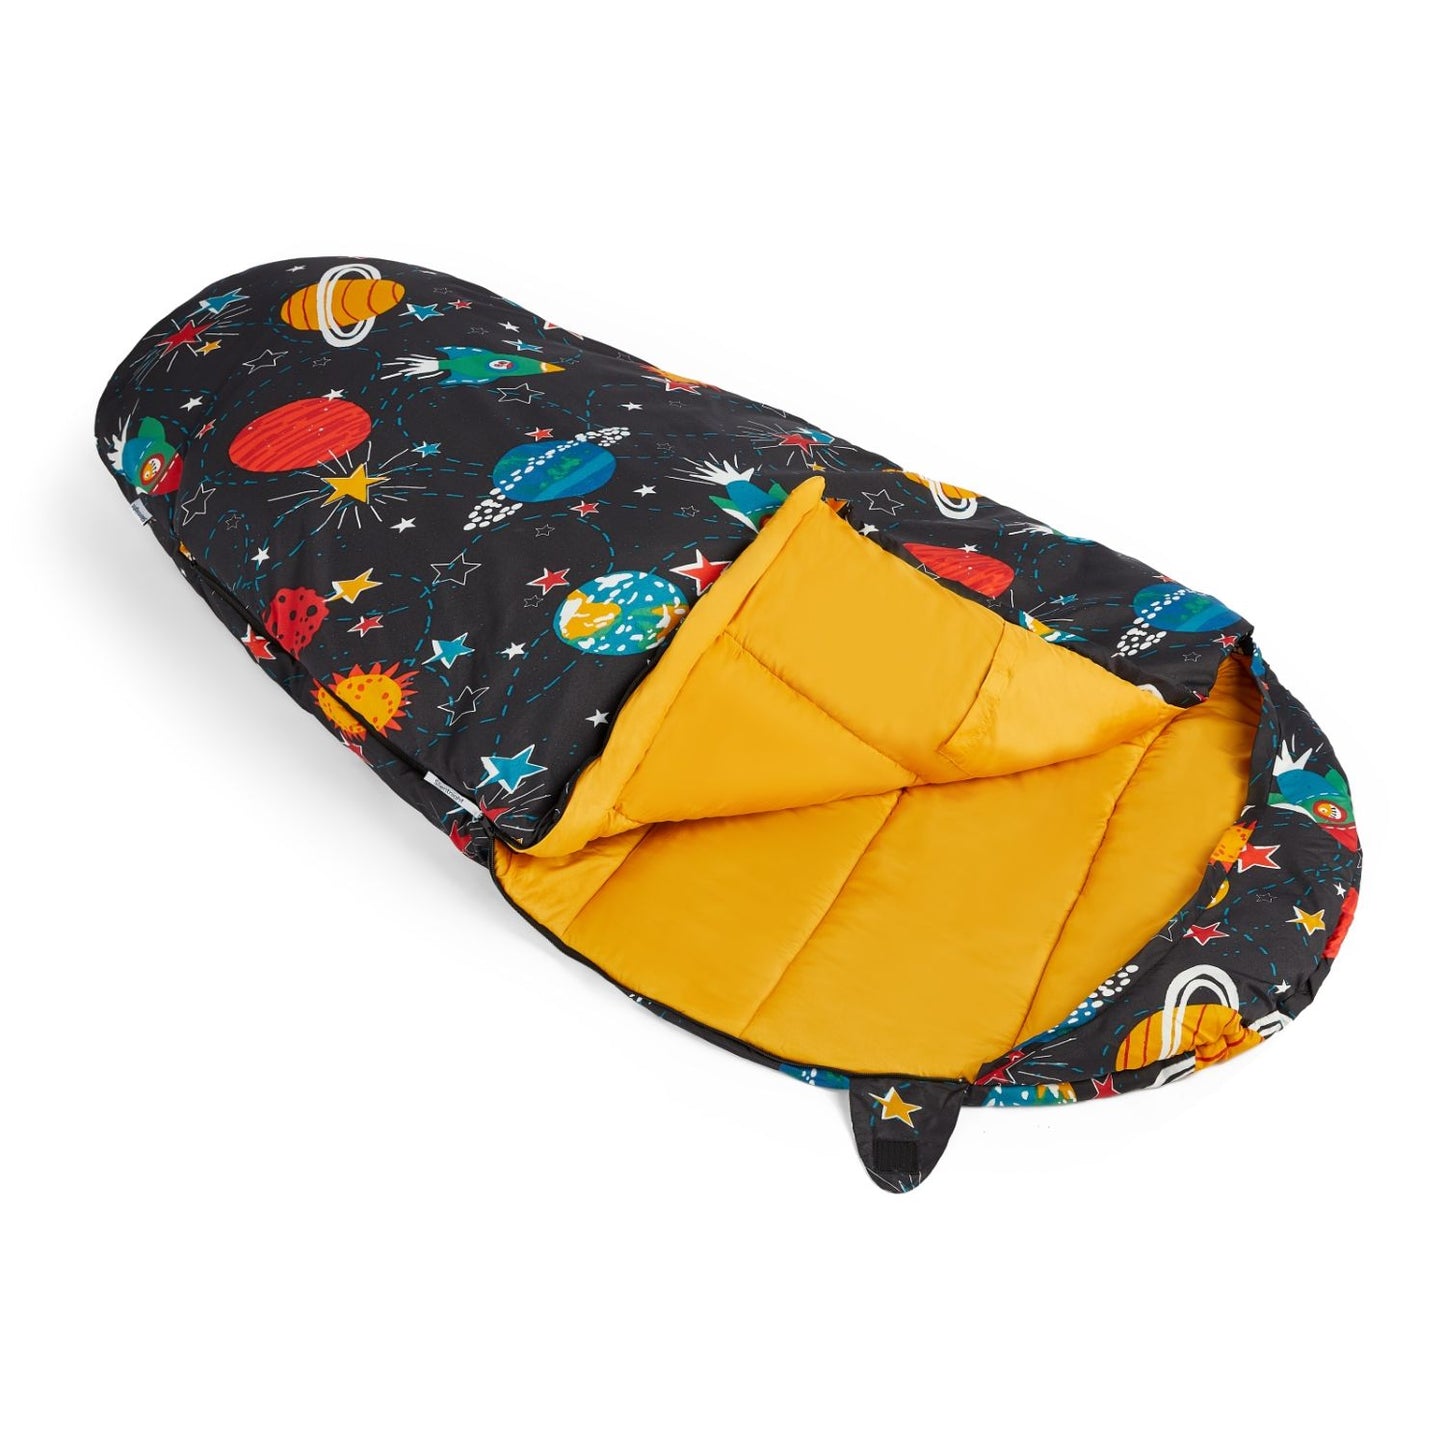 Silentnight Camping Collection Space Print Kids Sleeping Bag